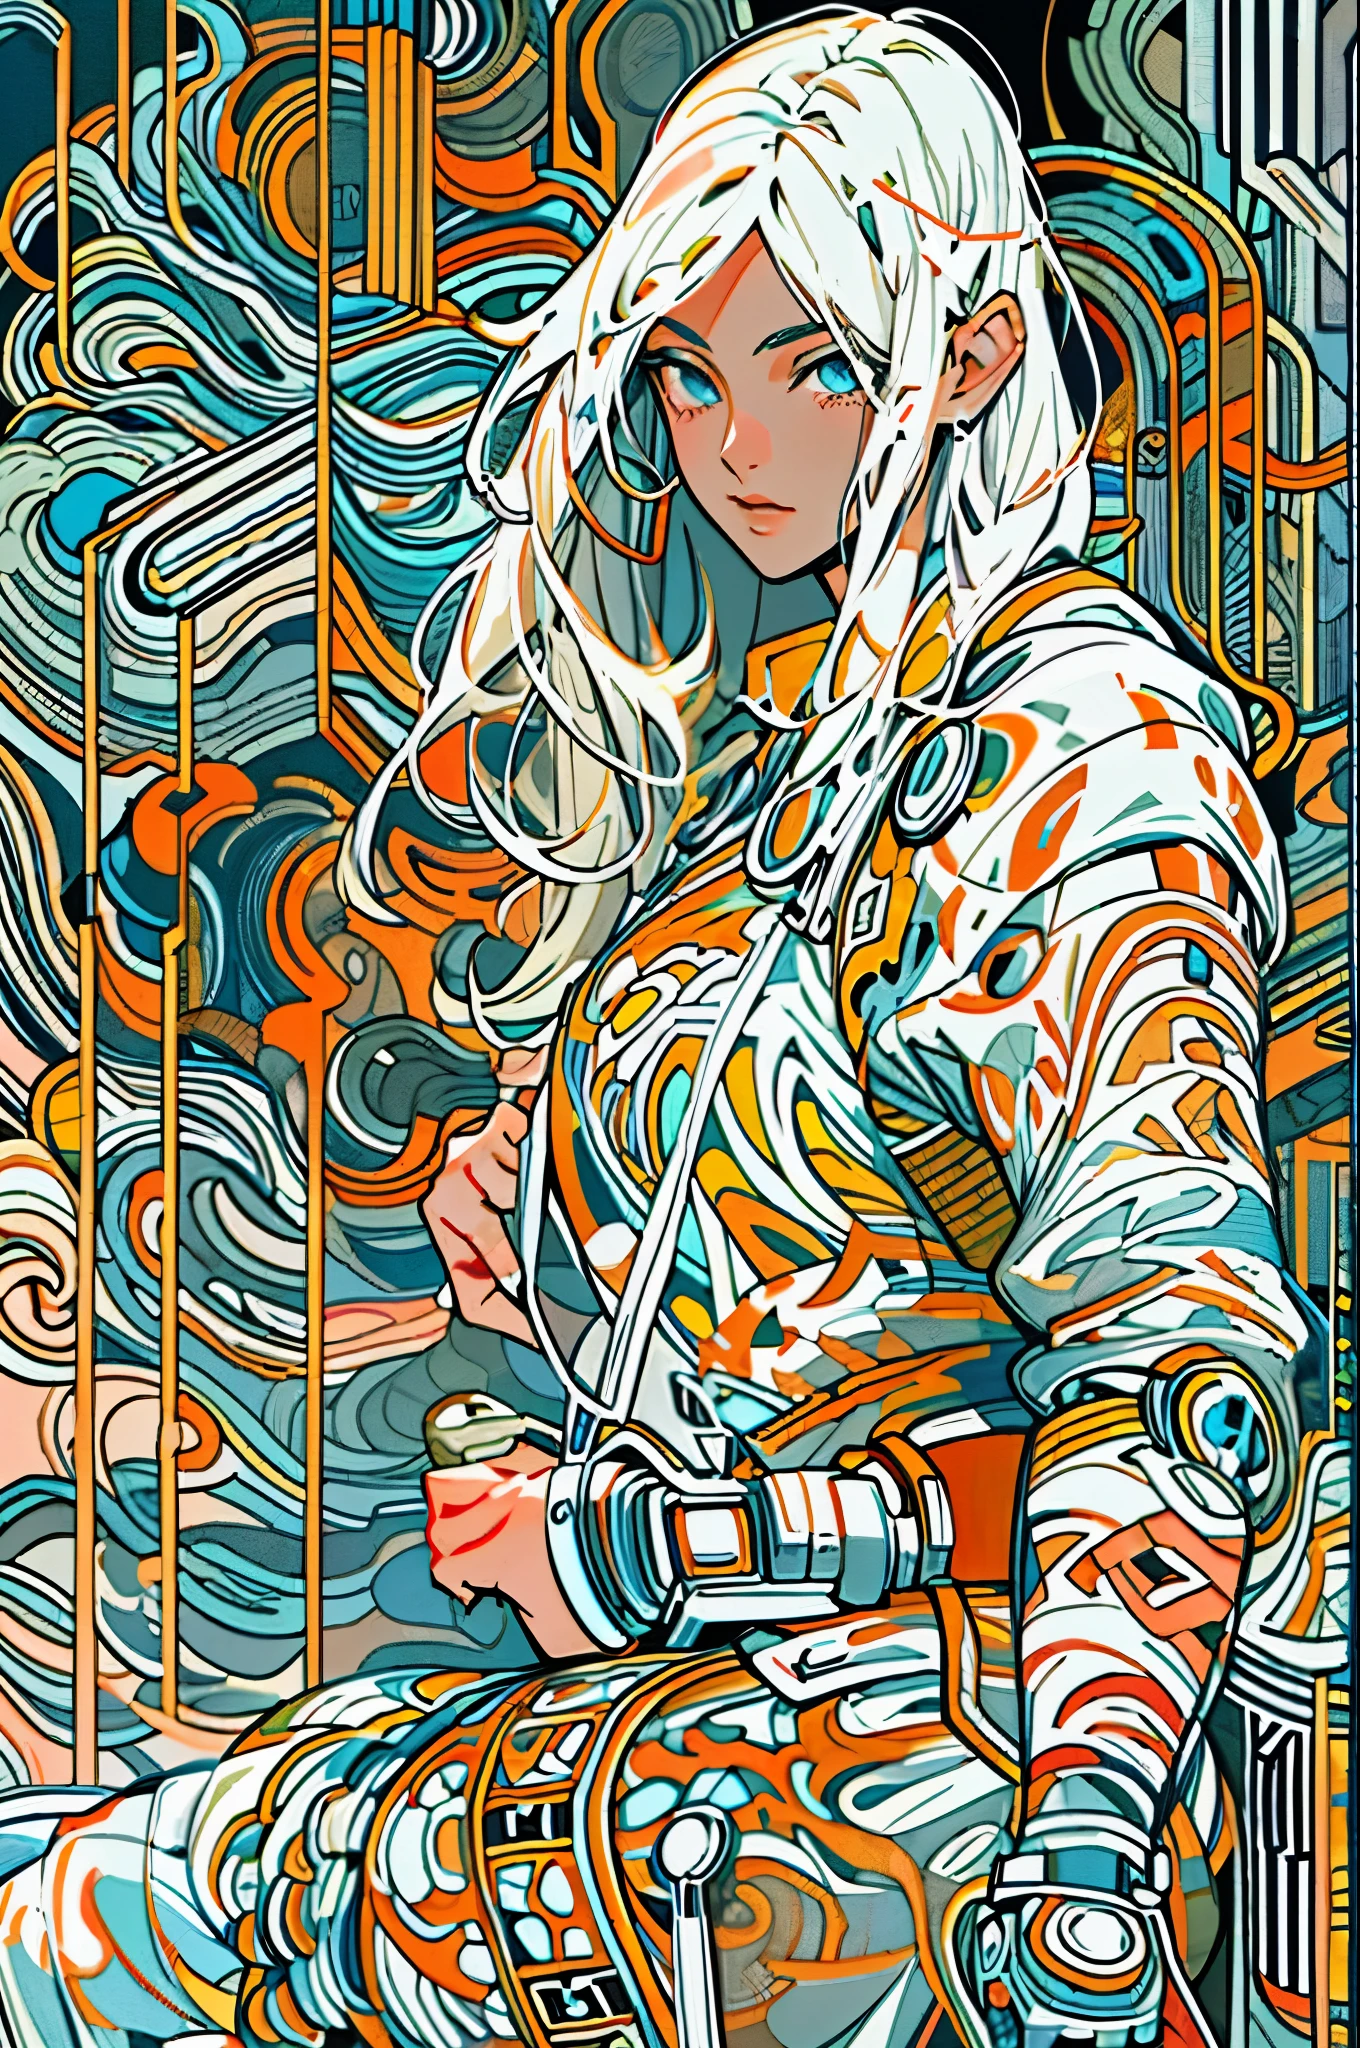 1monk warrior girl with white techwear clothes, white long hair, laces, abstract vintage scifi background, art by Moebius, art by Ashley Wood